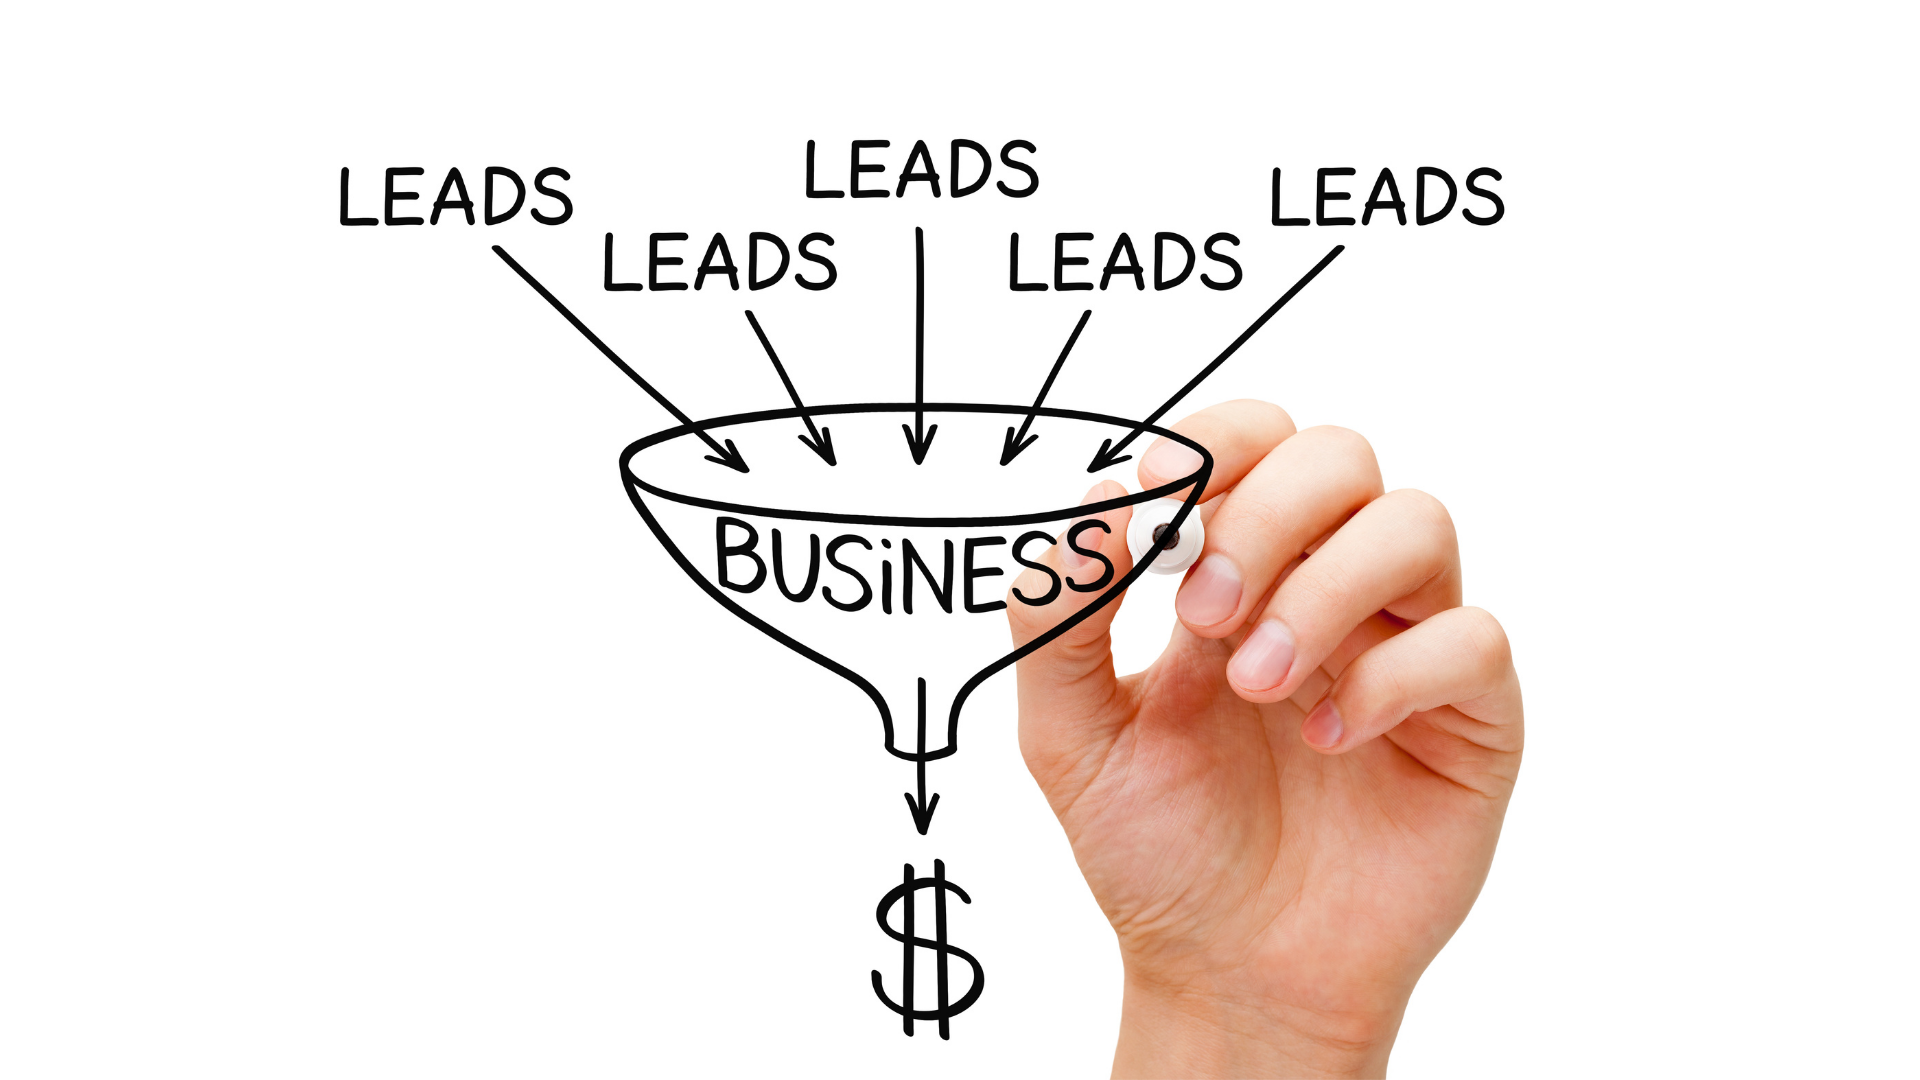 Vibrum - Online Lead Generation - Leads to Business